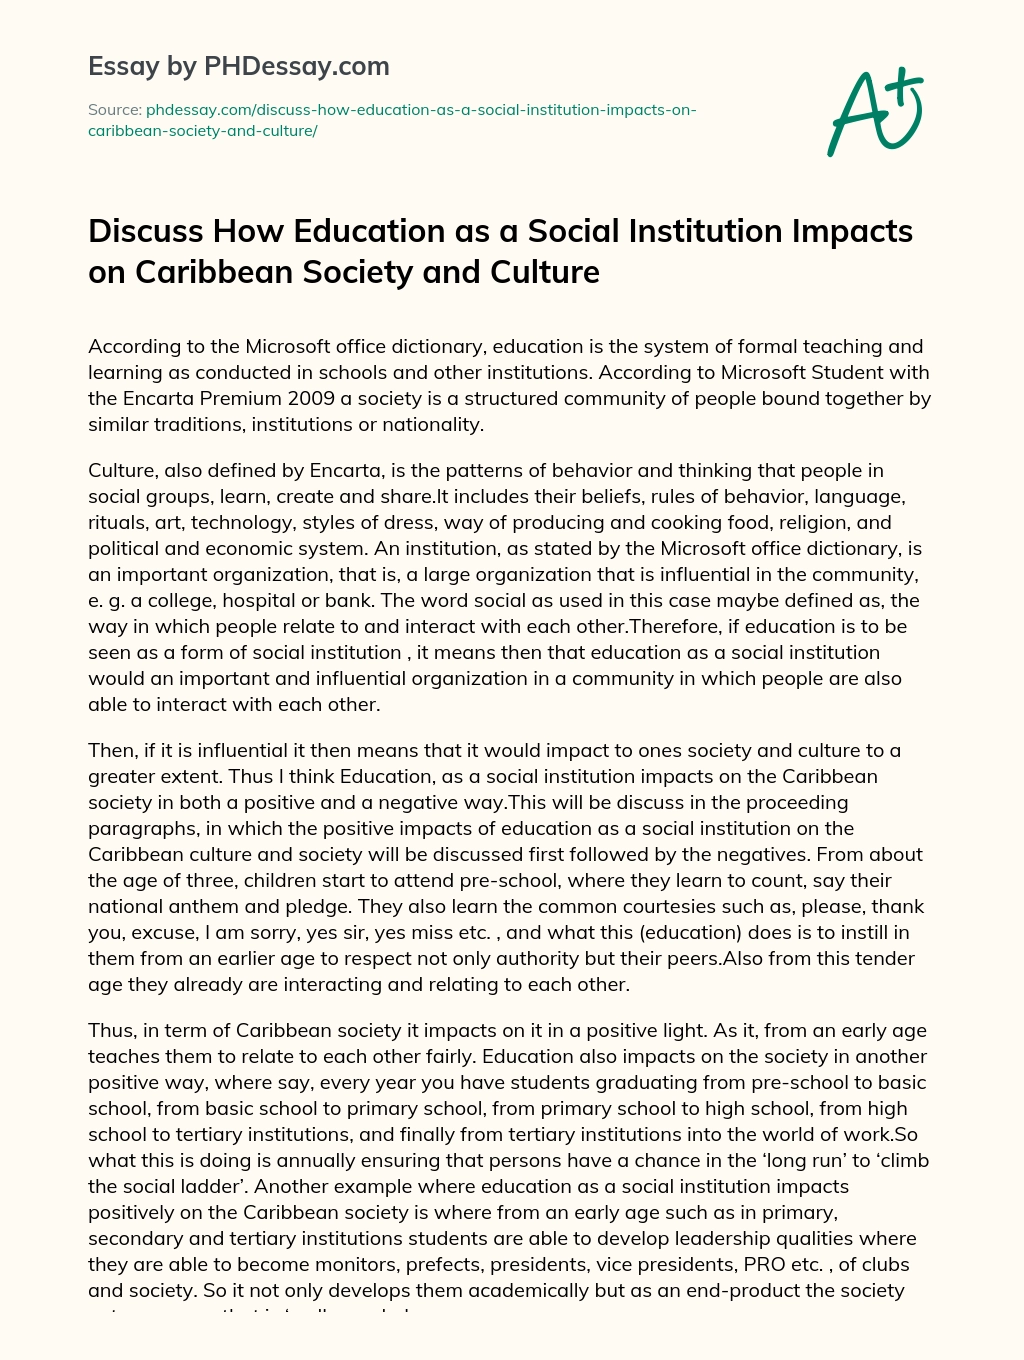 Defining Education as a Social Institution and its Relationship with Culture and Society essay